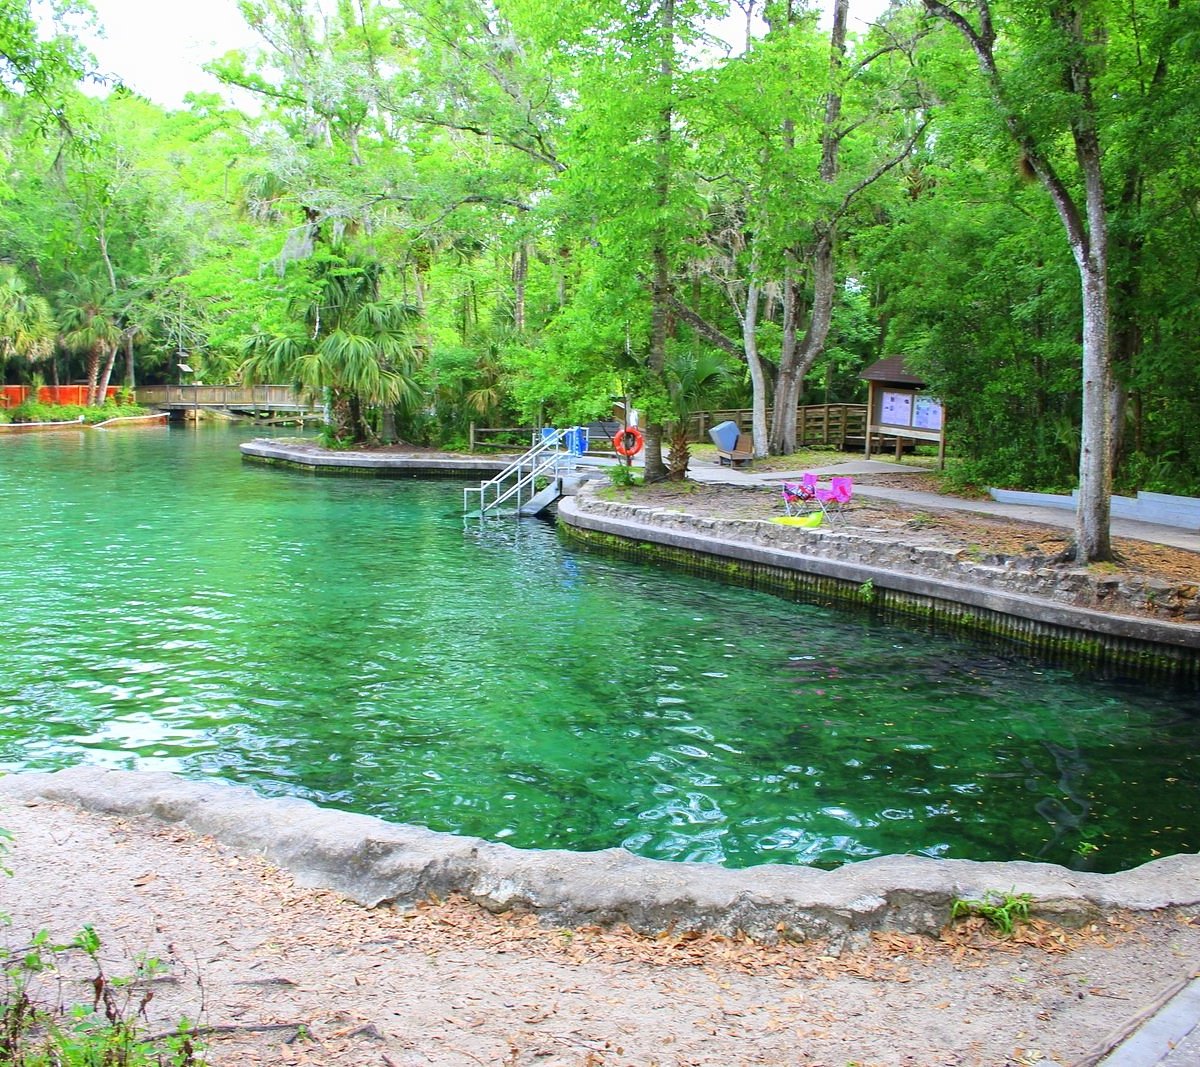 Kelly Park/Rock Springs: Beautiful park, cool swimming hole, shaded  campground